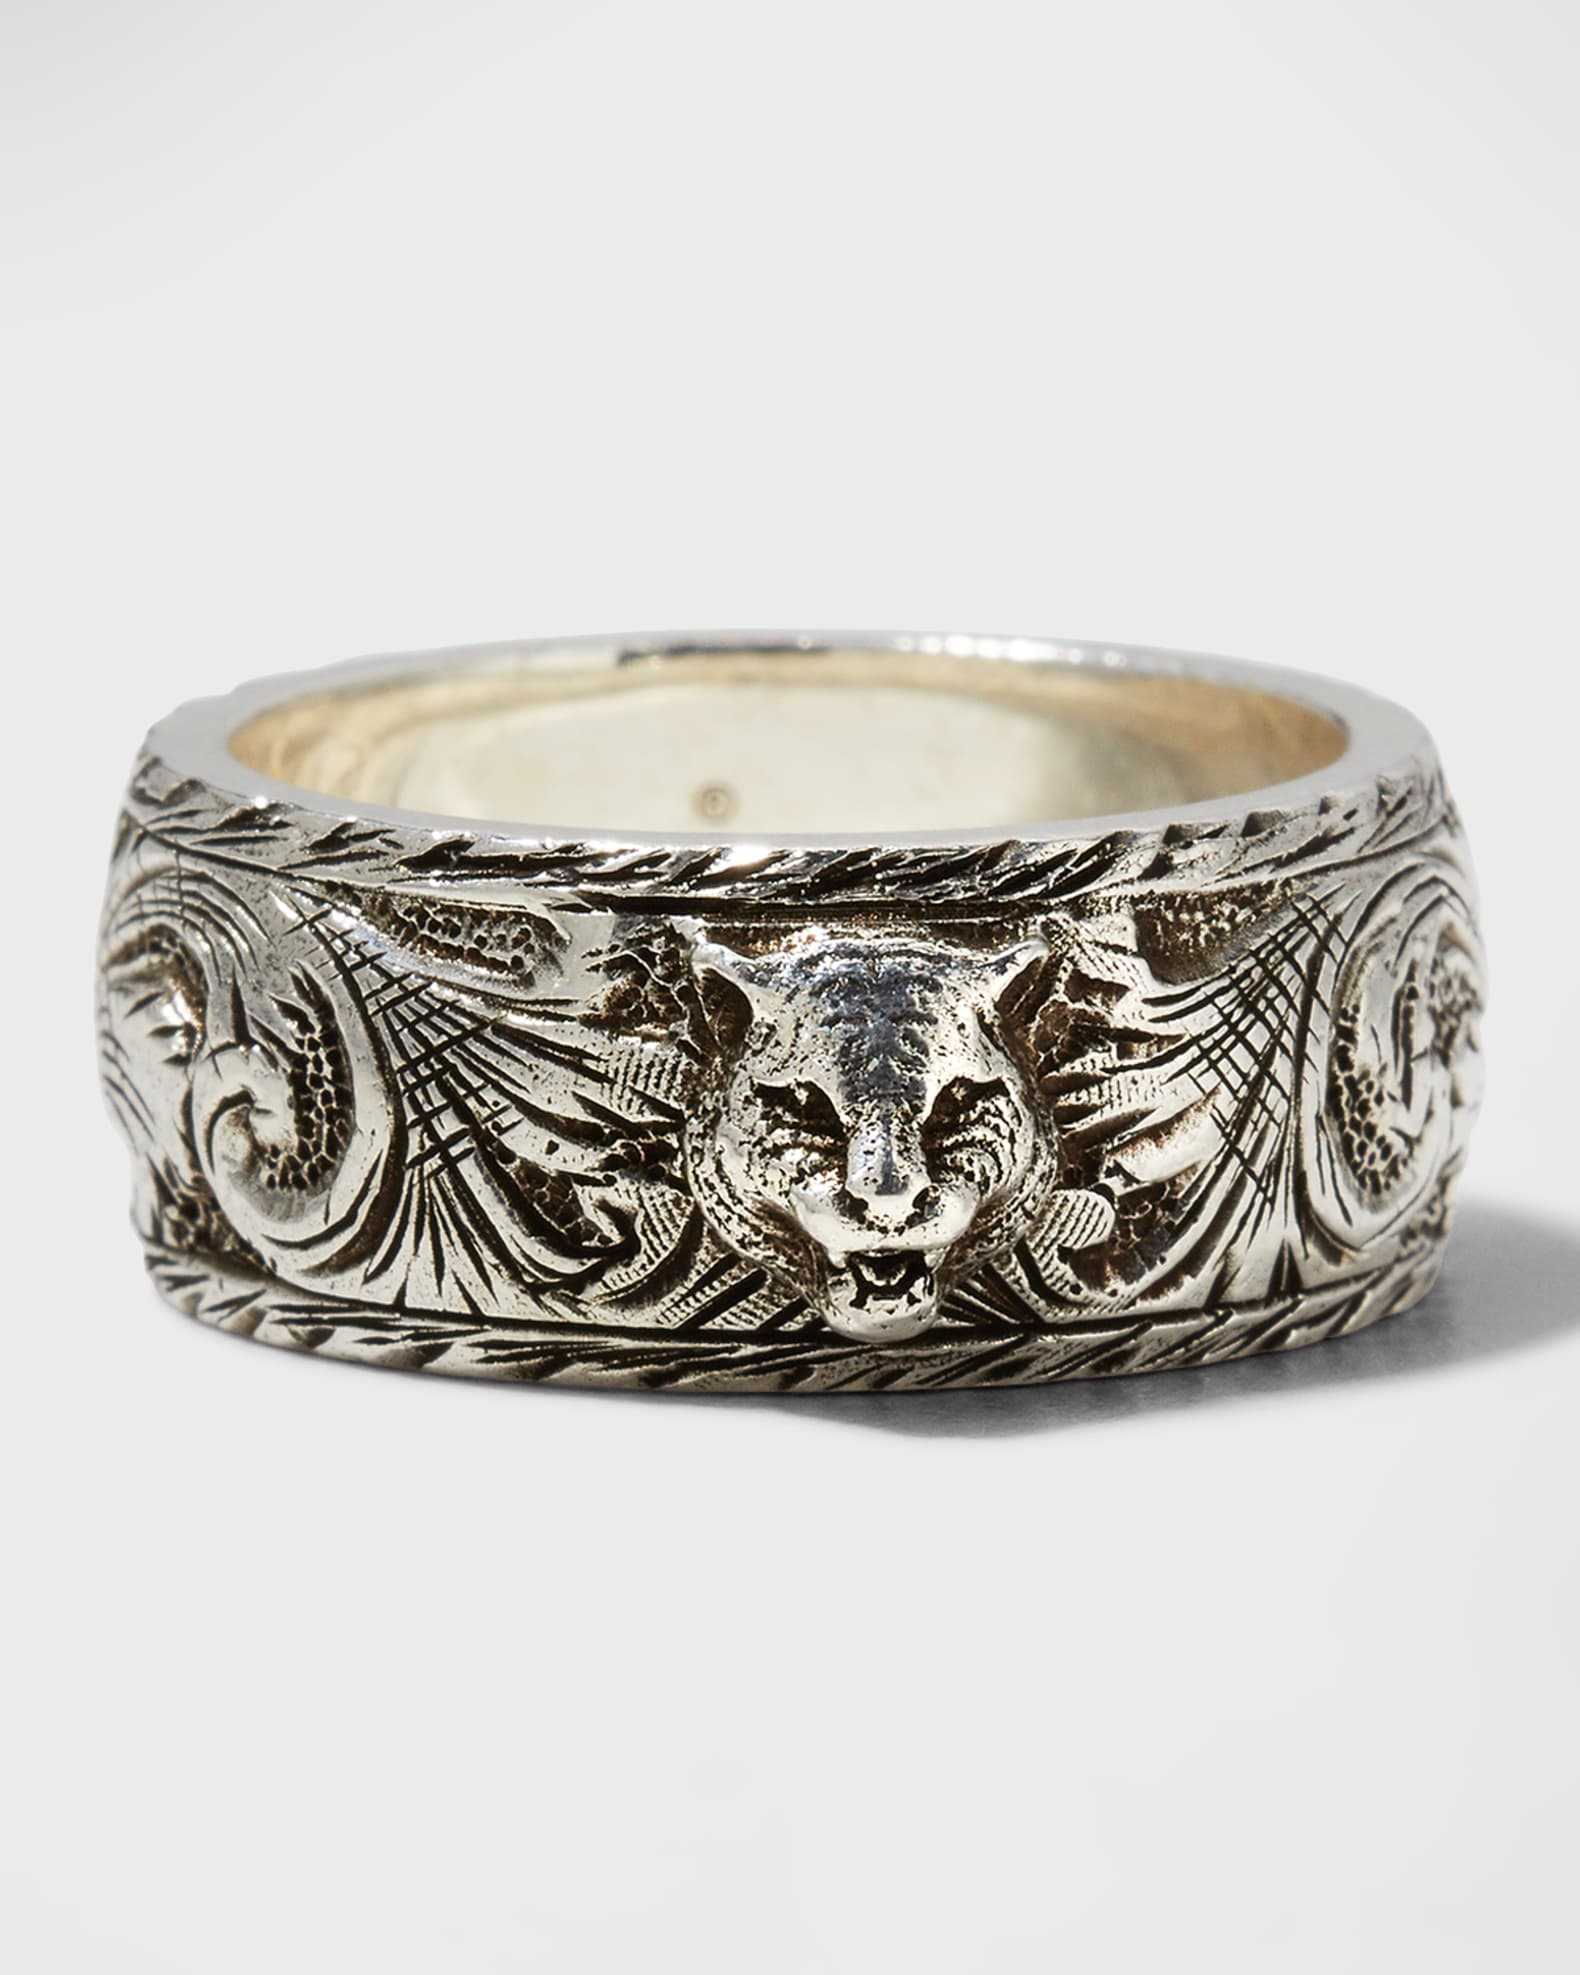 Gucci Men's Ghost Sterling Silver Ring